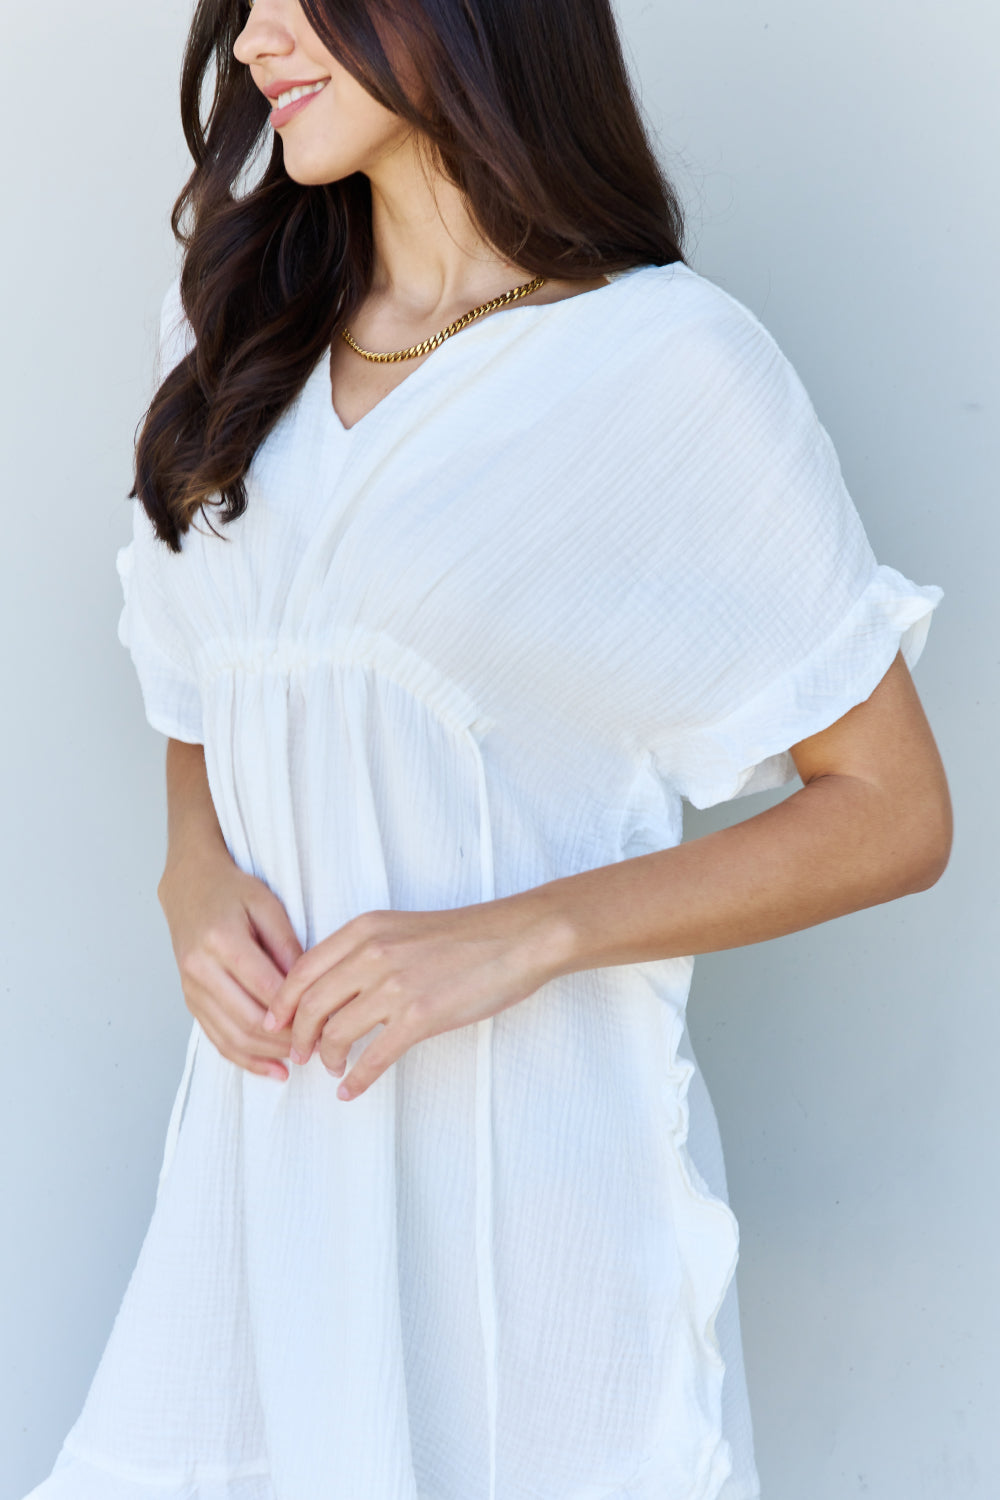 Ninexis Out Of Time Full Size Ruffle Hem Dress with Drawstring Waistband in White  Krazy Heart Designs Boutique   